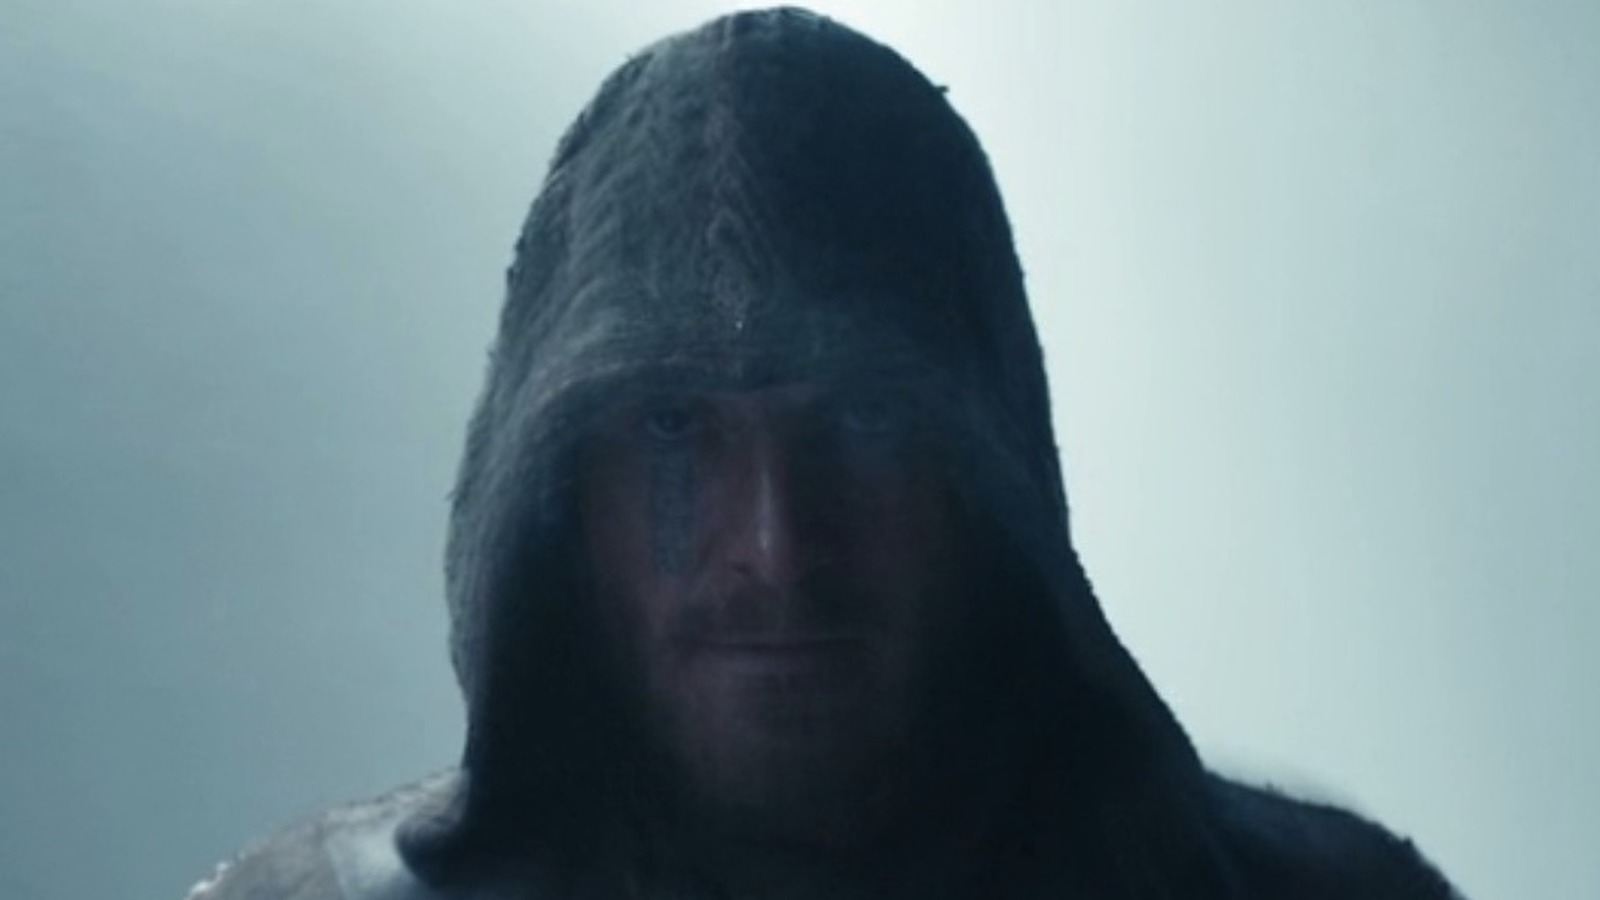 Assassin's Creed - Rotten Tomatoes